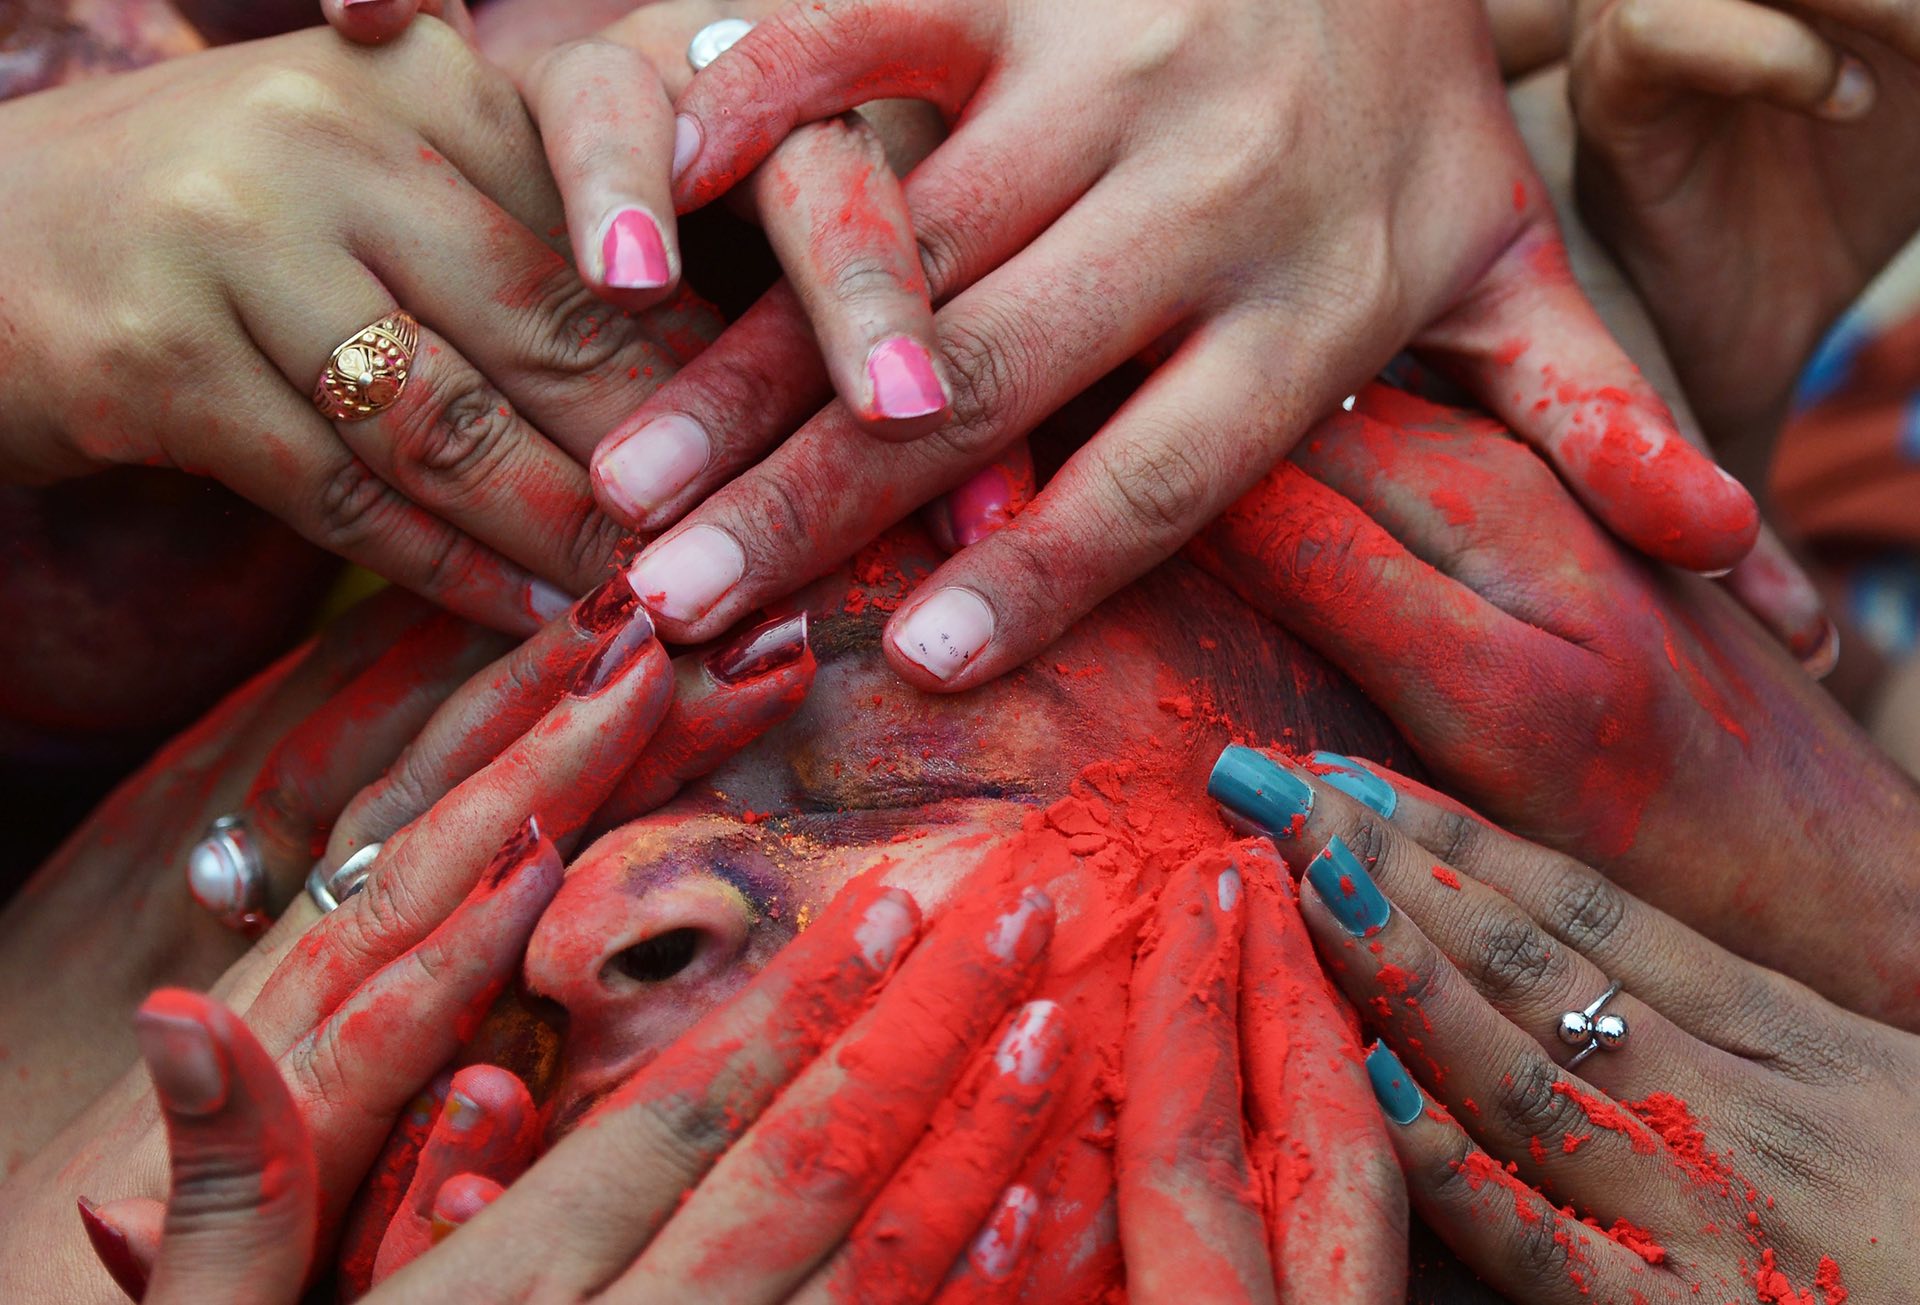 Students at an event in Kolkata smear coloured powder in a spirit of celebration. PHOTO: AFP